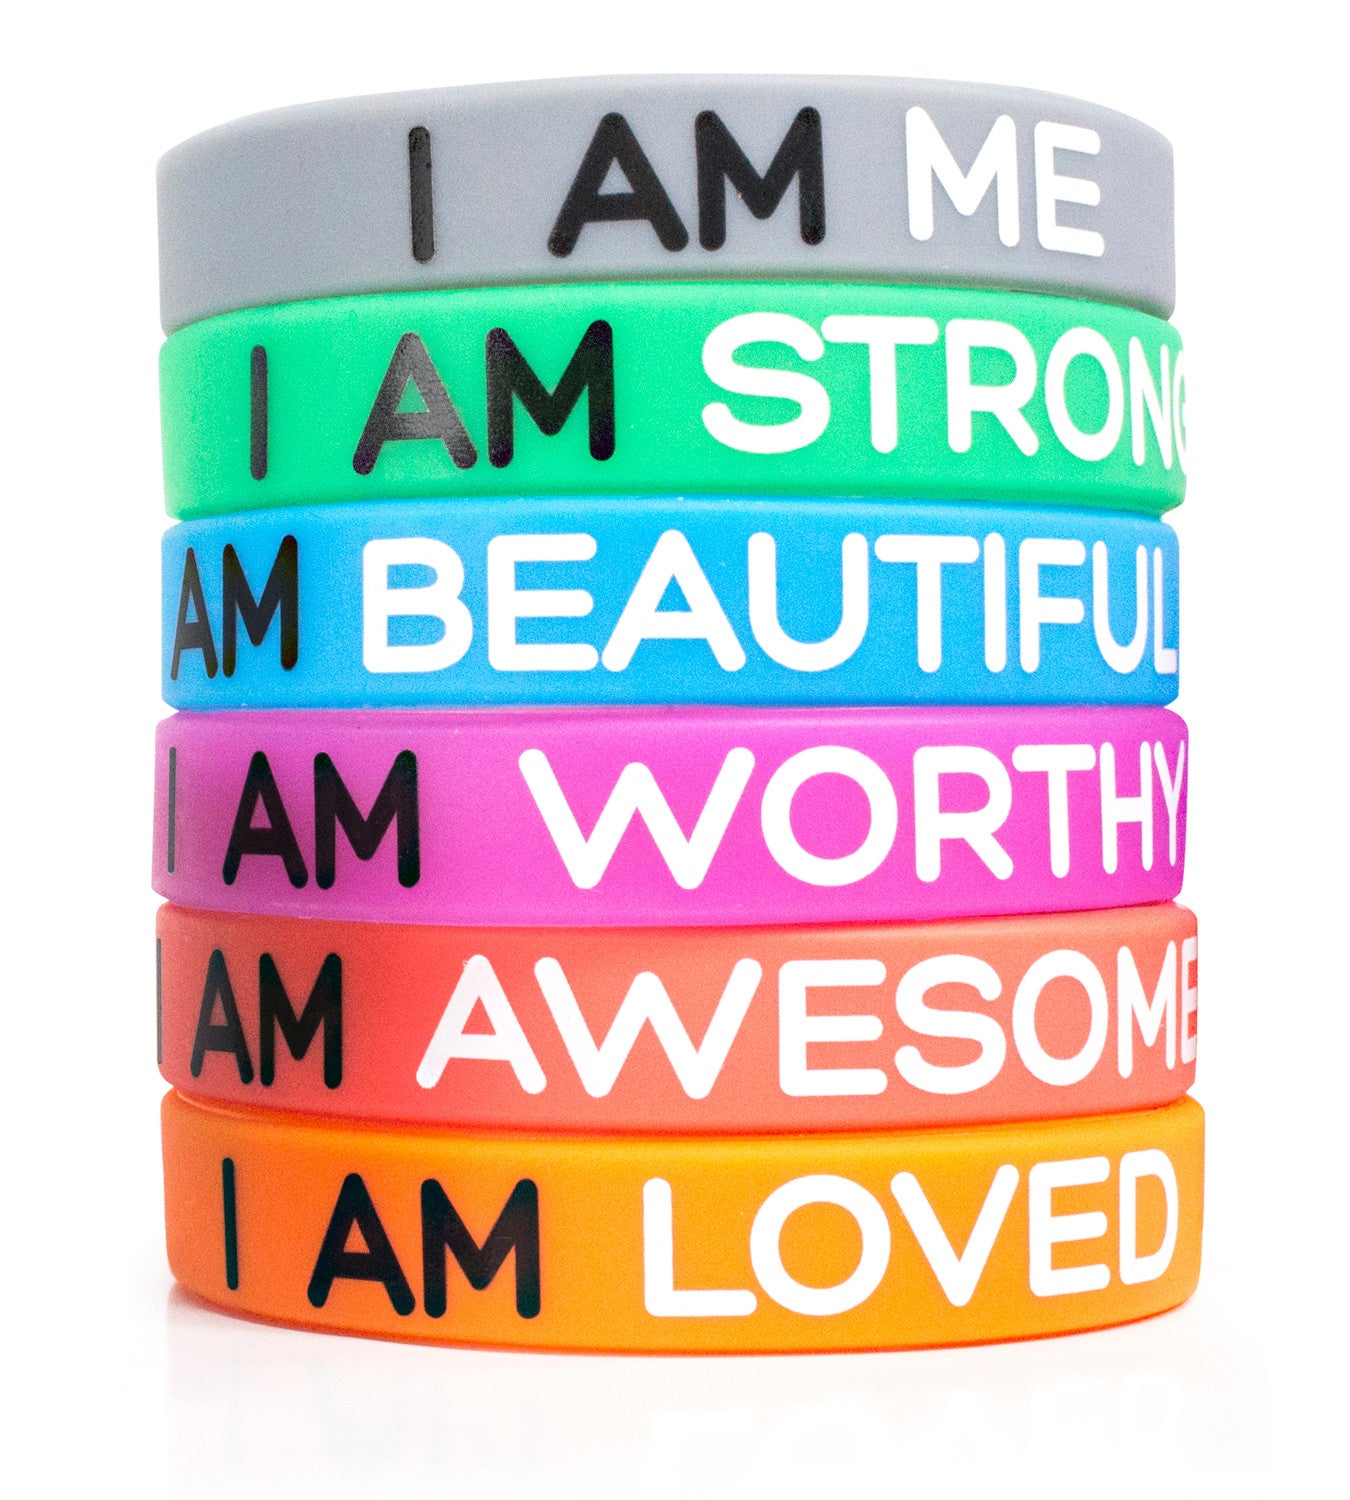 Blank Rubber Silicone Bracelets Eventitems 48 pcs Multi-Pack Silicone Wristbands Select from a Variety of Colors 